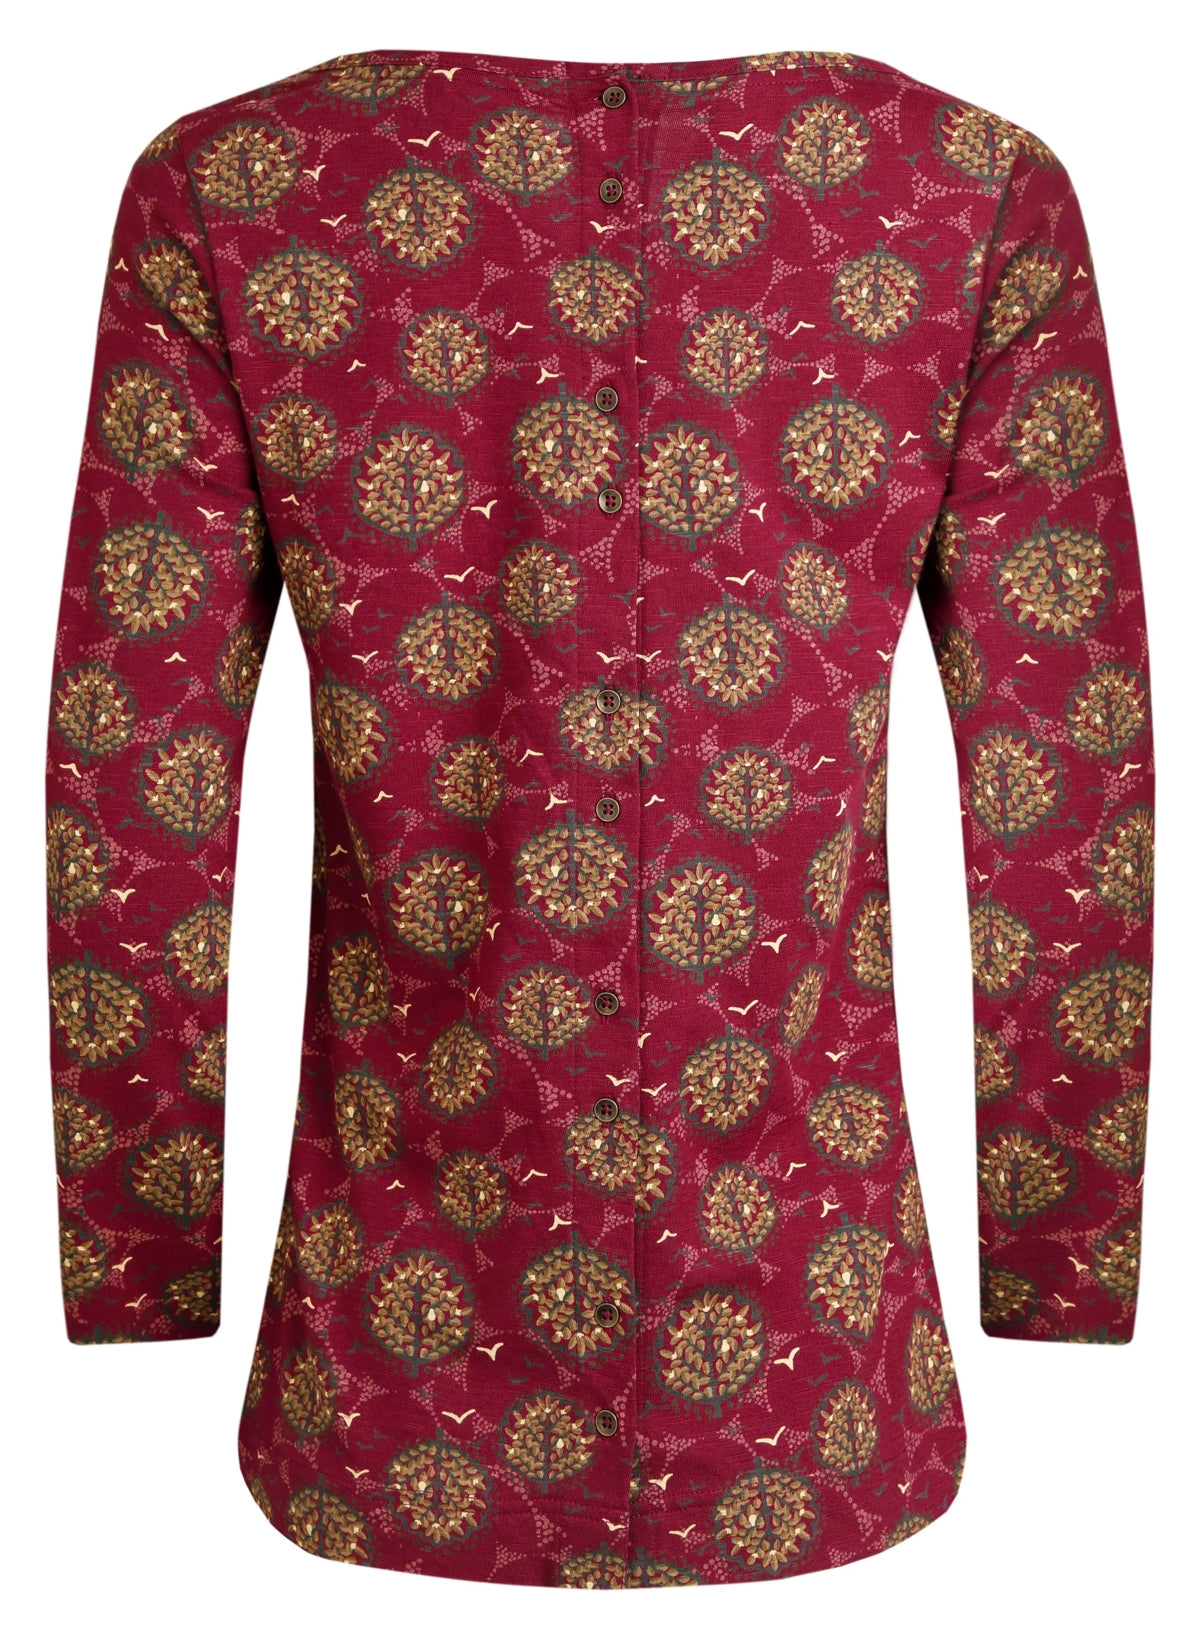 Weird Fish women's Tupelo long sleeve tee in Mulled Wine with abstract floral pattern and buttons down the back.